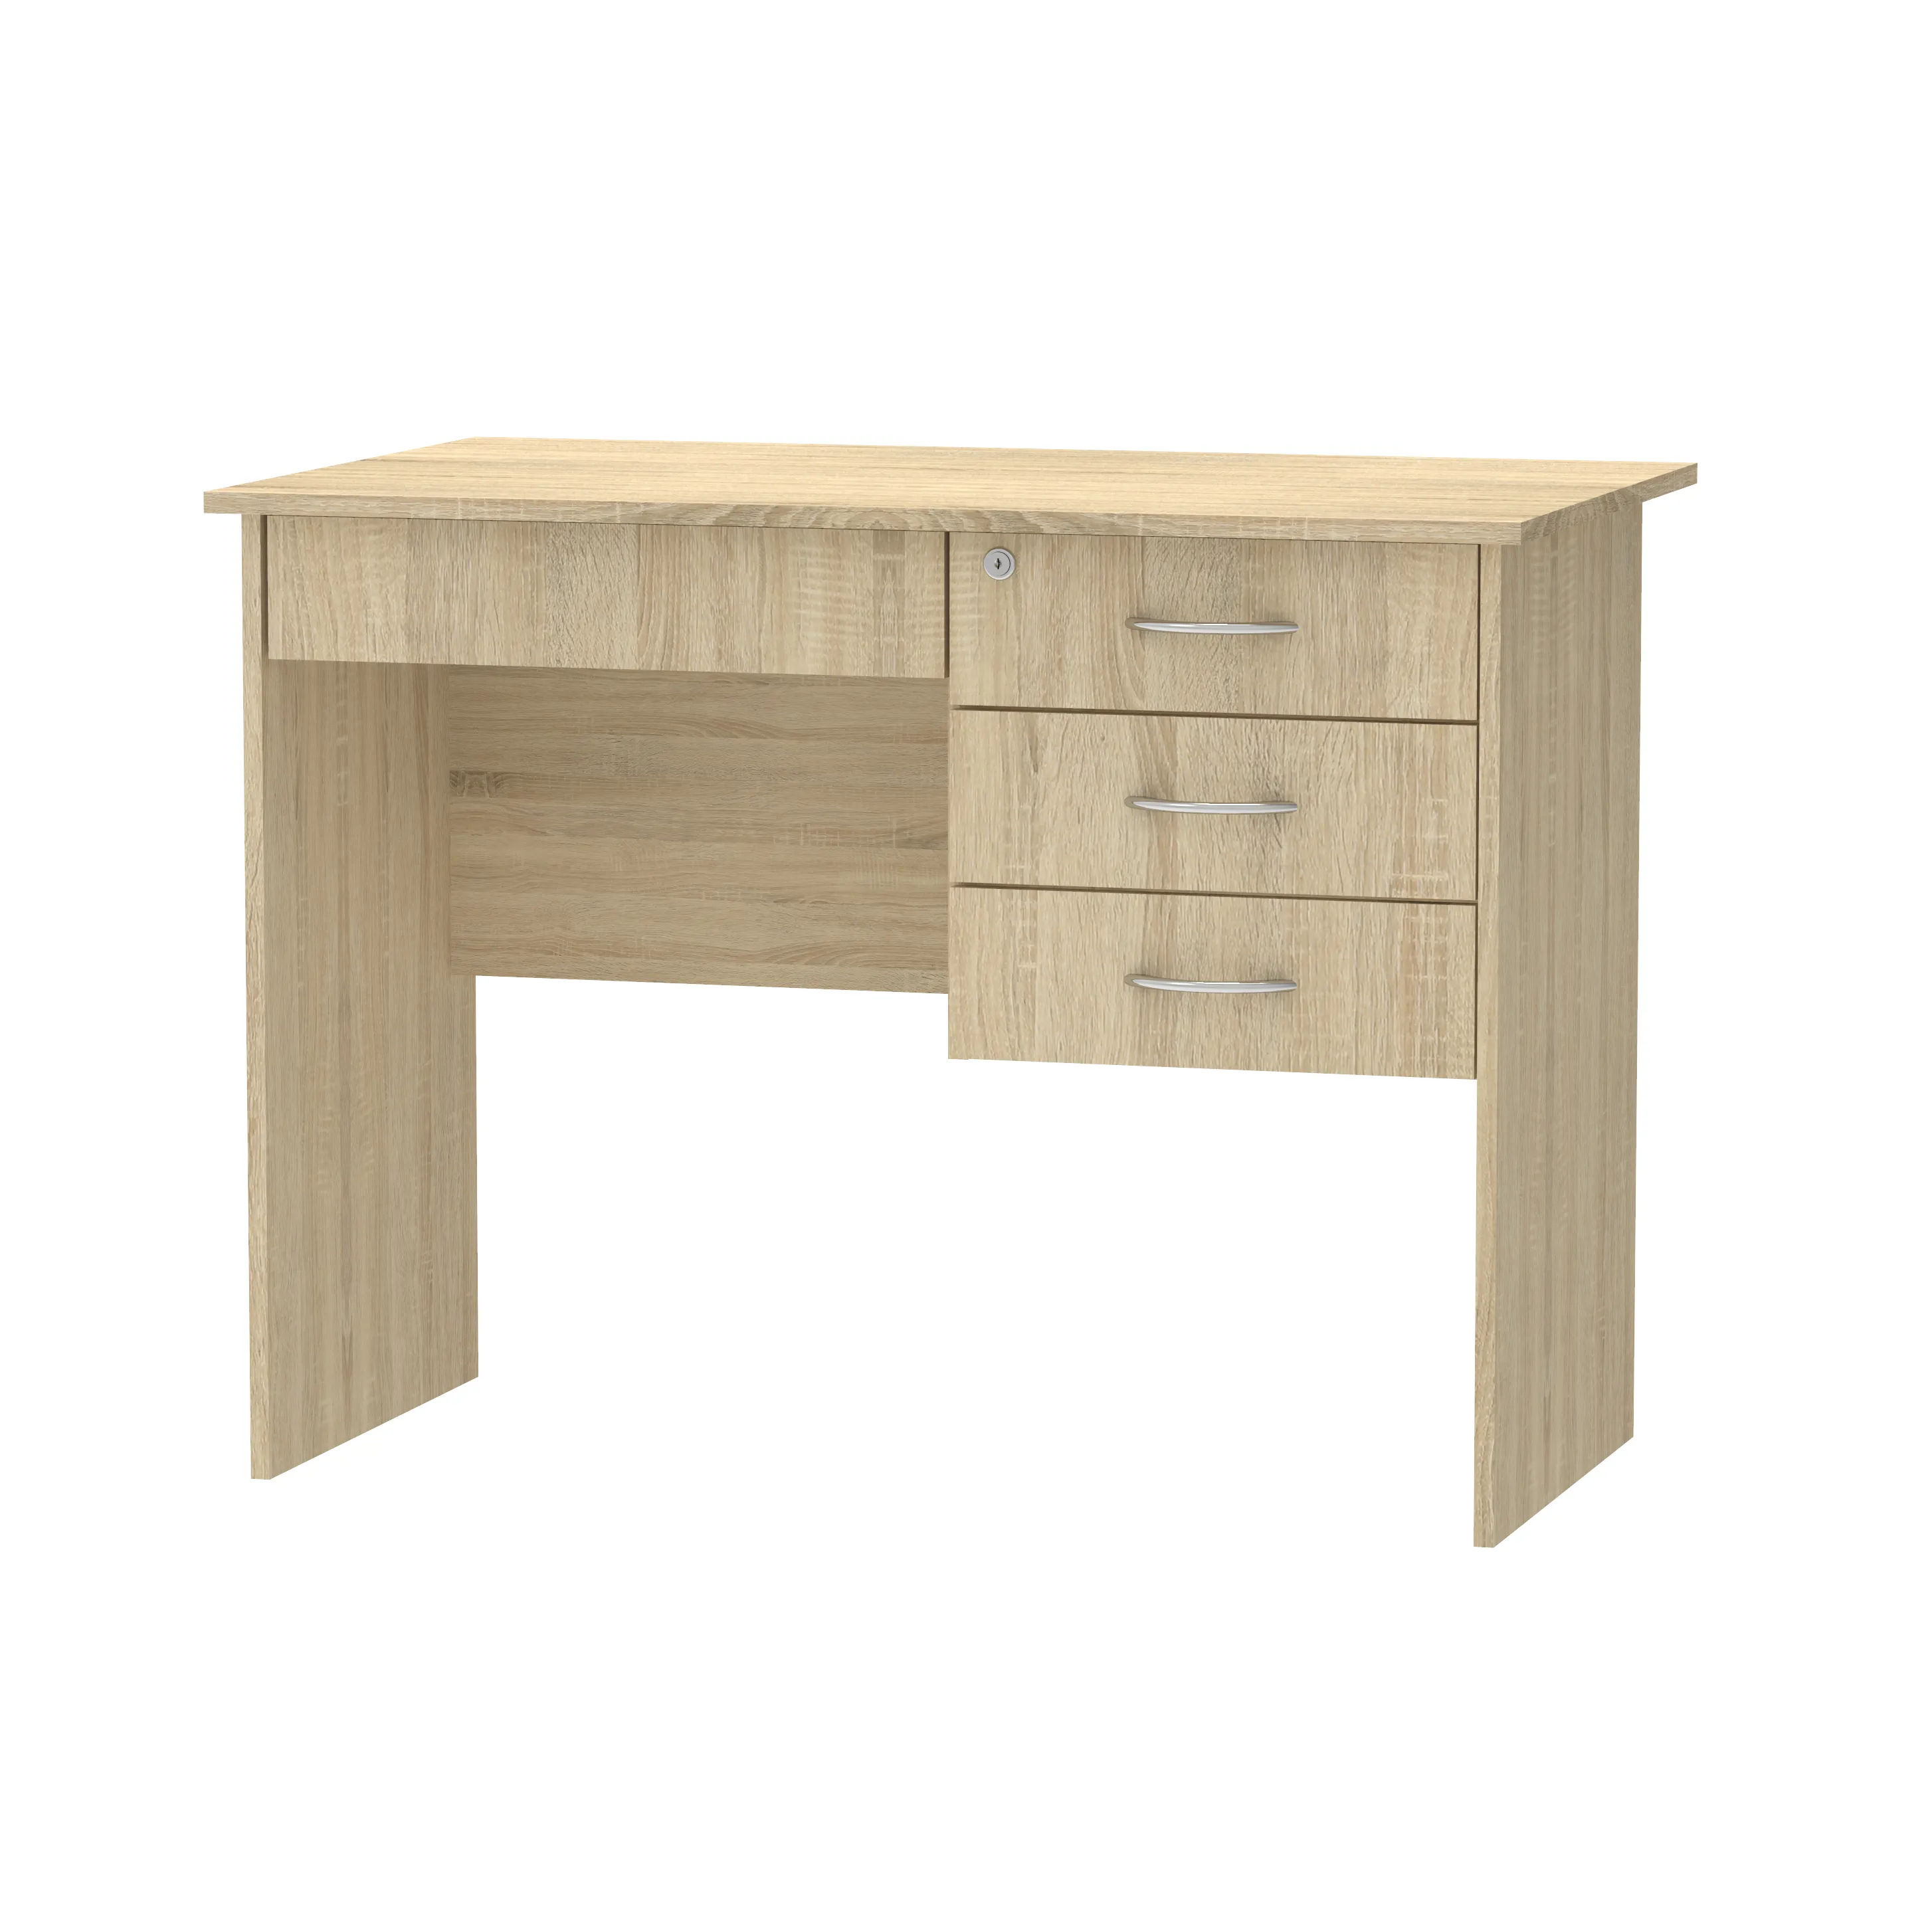 Wood Wooden Office Desks with Drawer Simple Design Office Workstation Furniture Made in Malaysia 1331